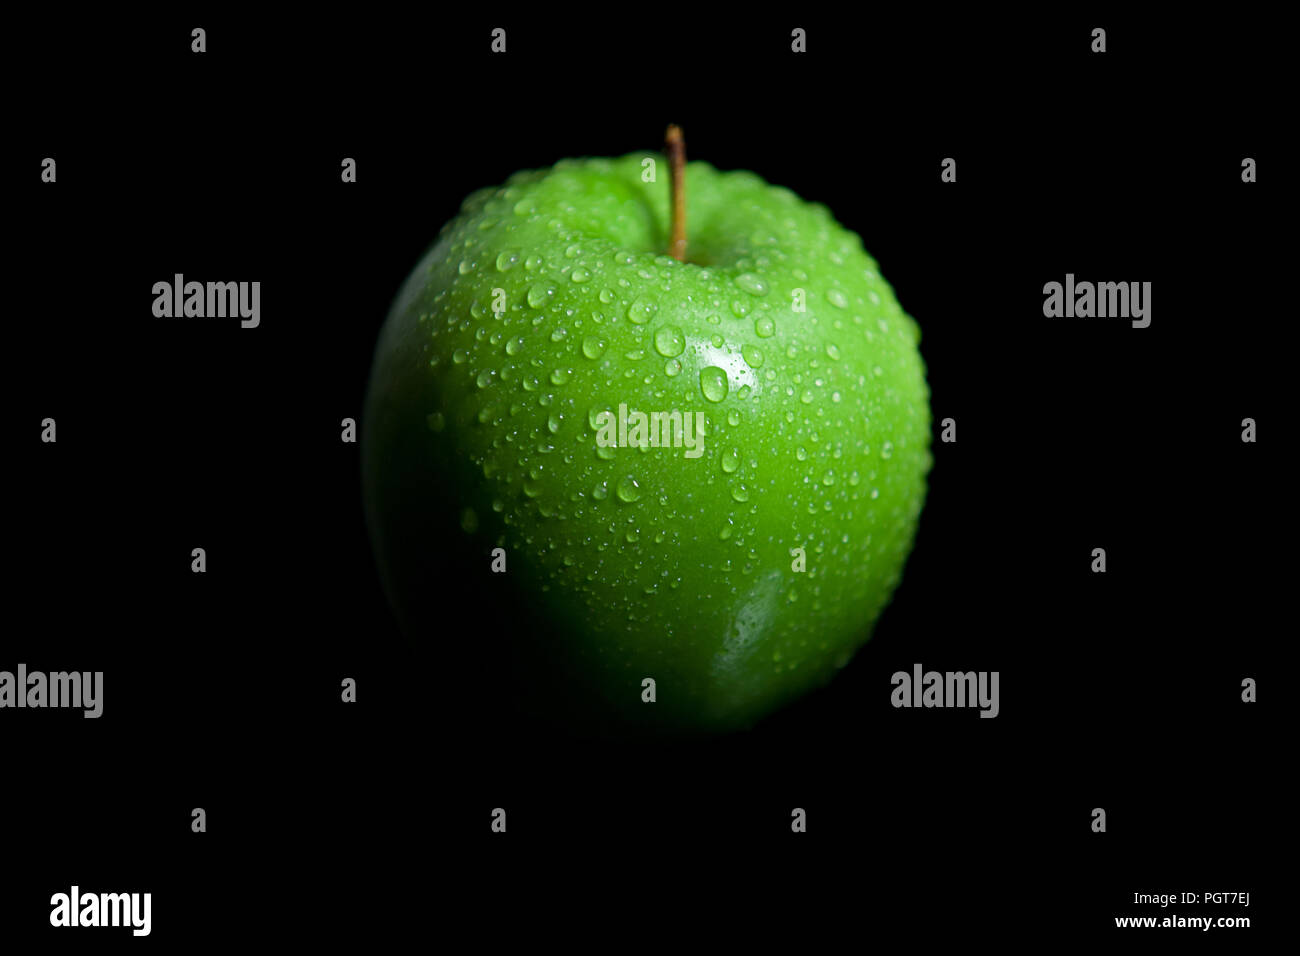 Wet droplets on green granny smith apple with black background Stock Photo